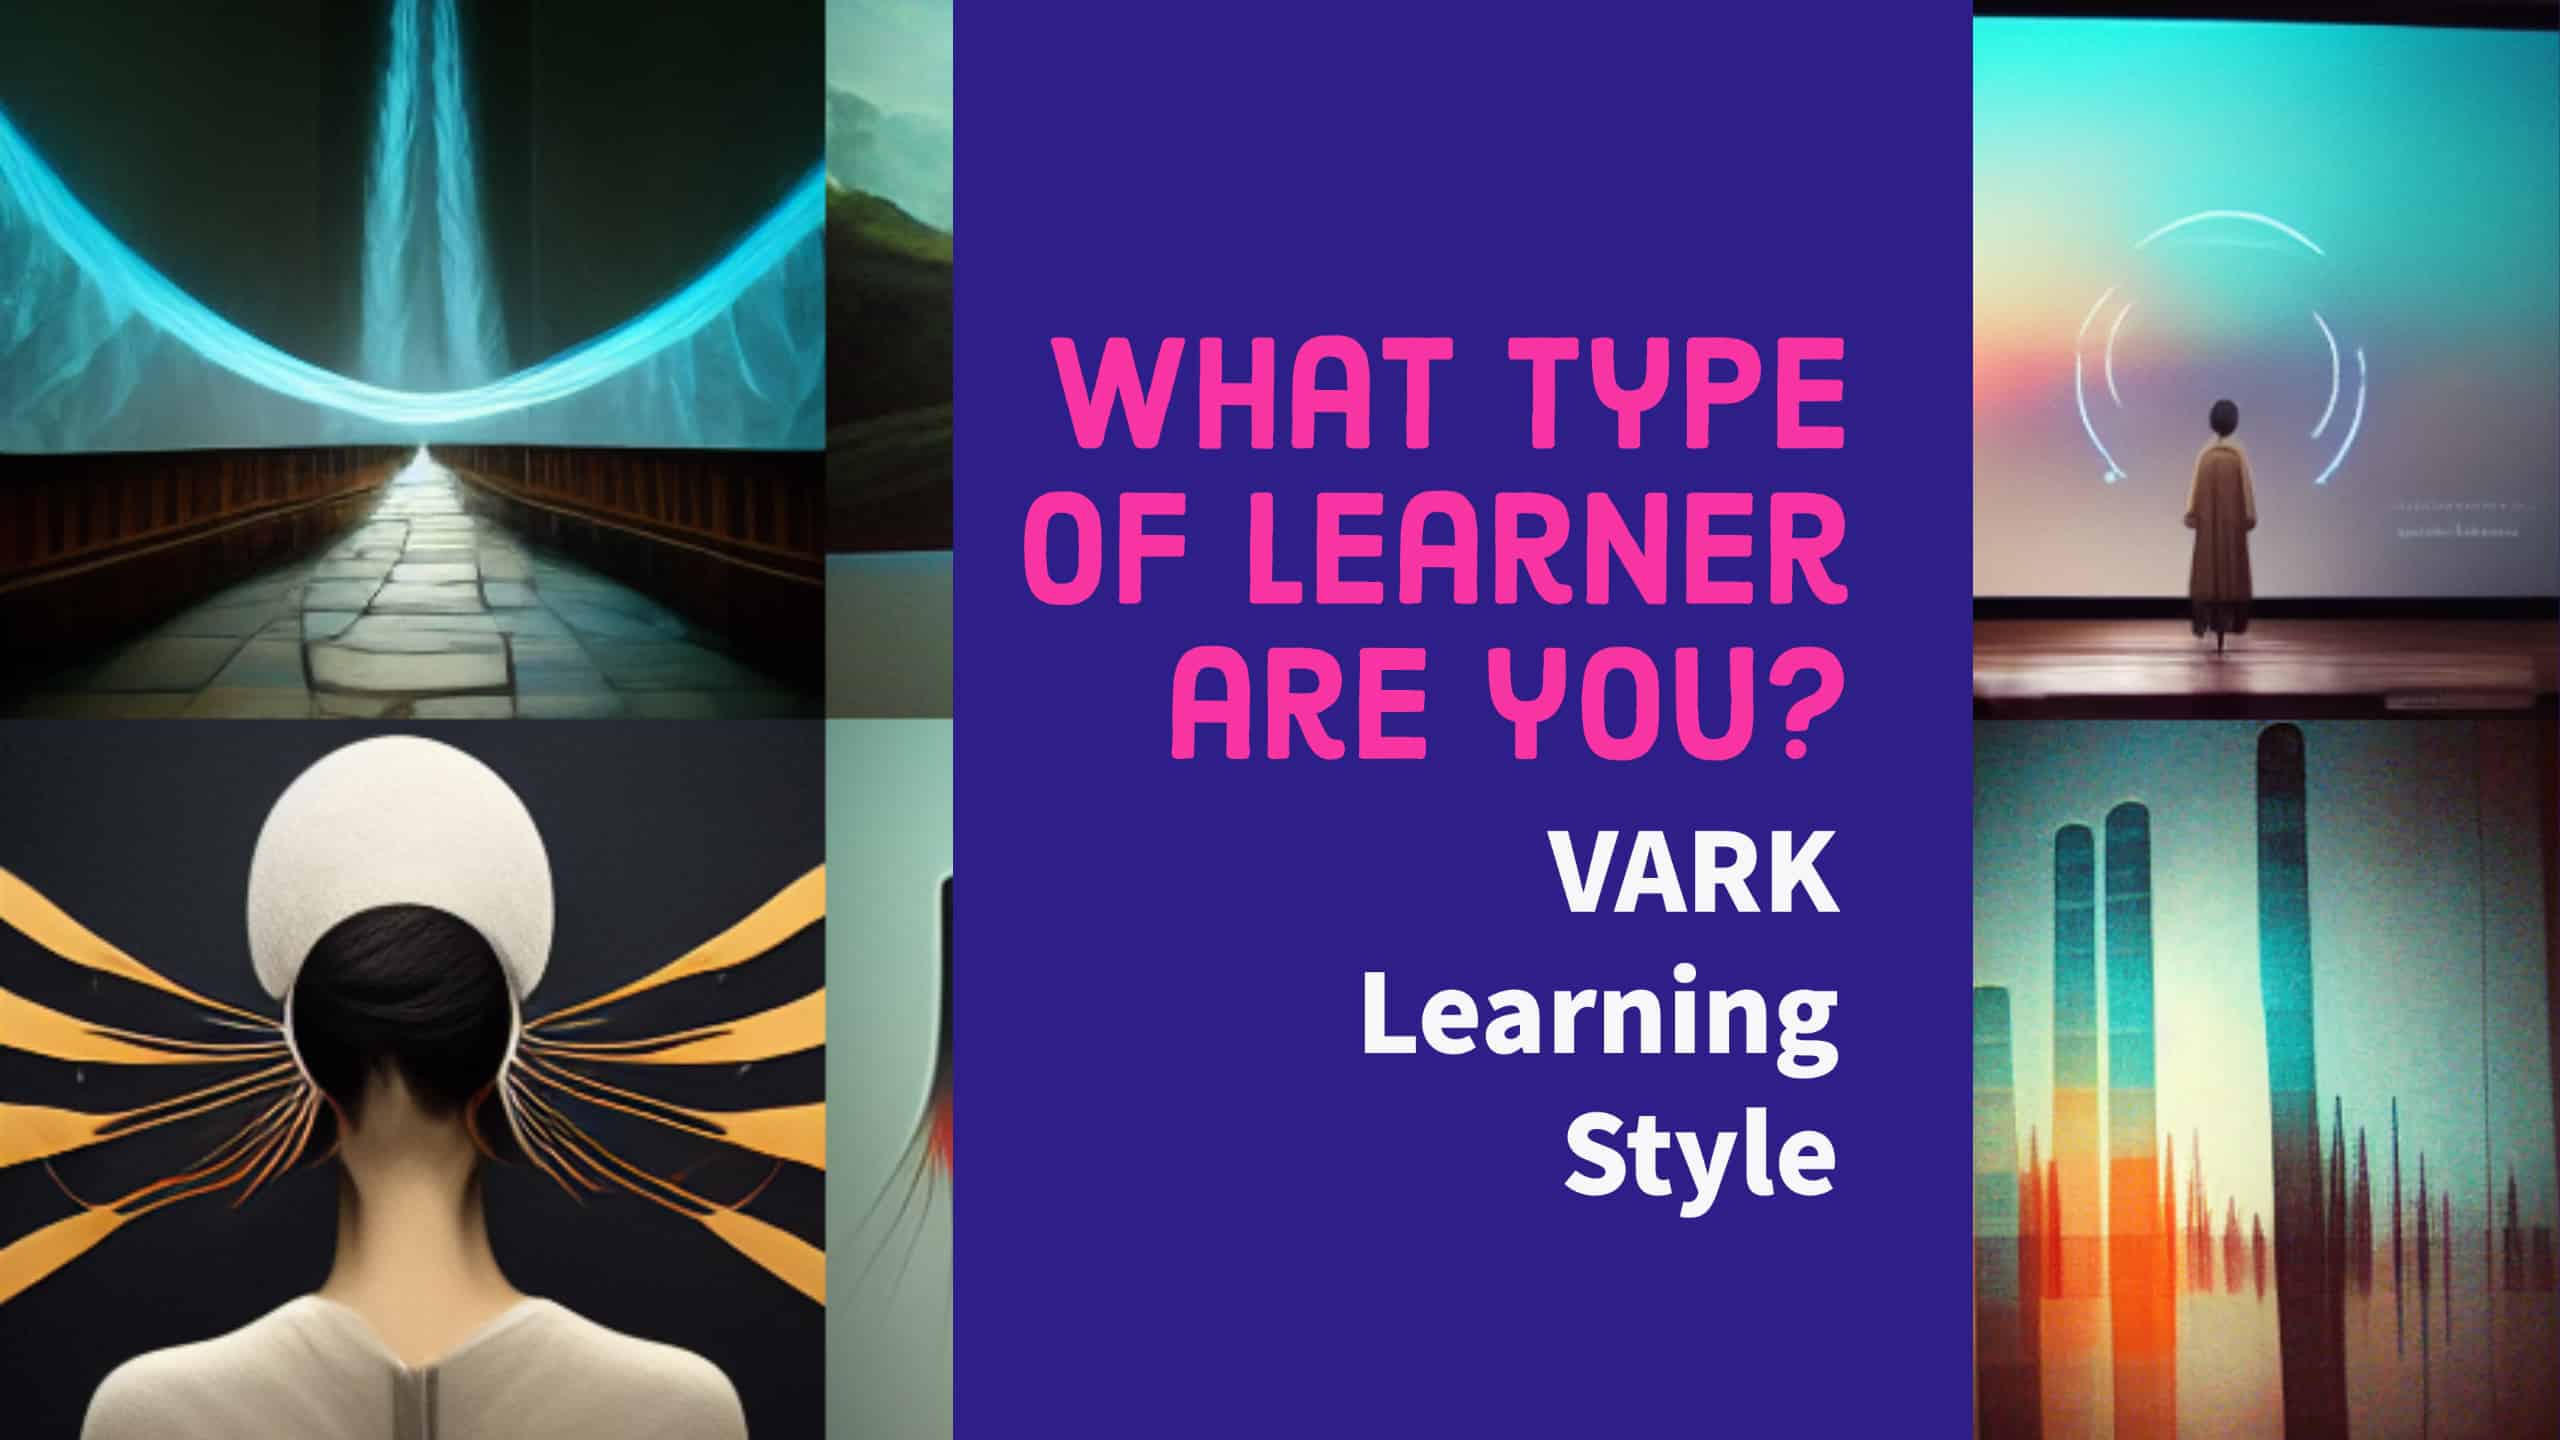 What type of learner are you: VARK Learning Style